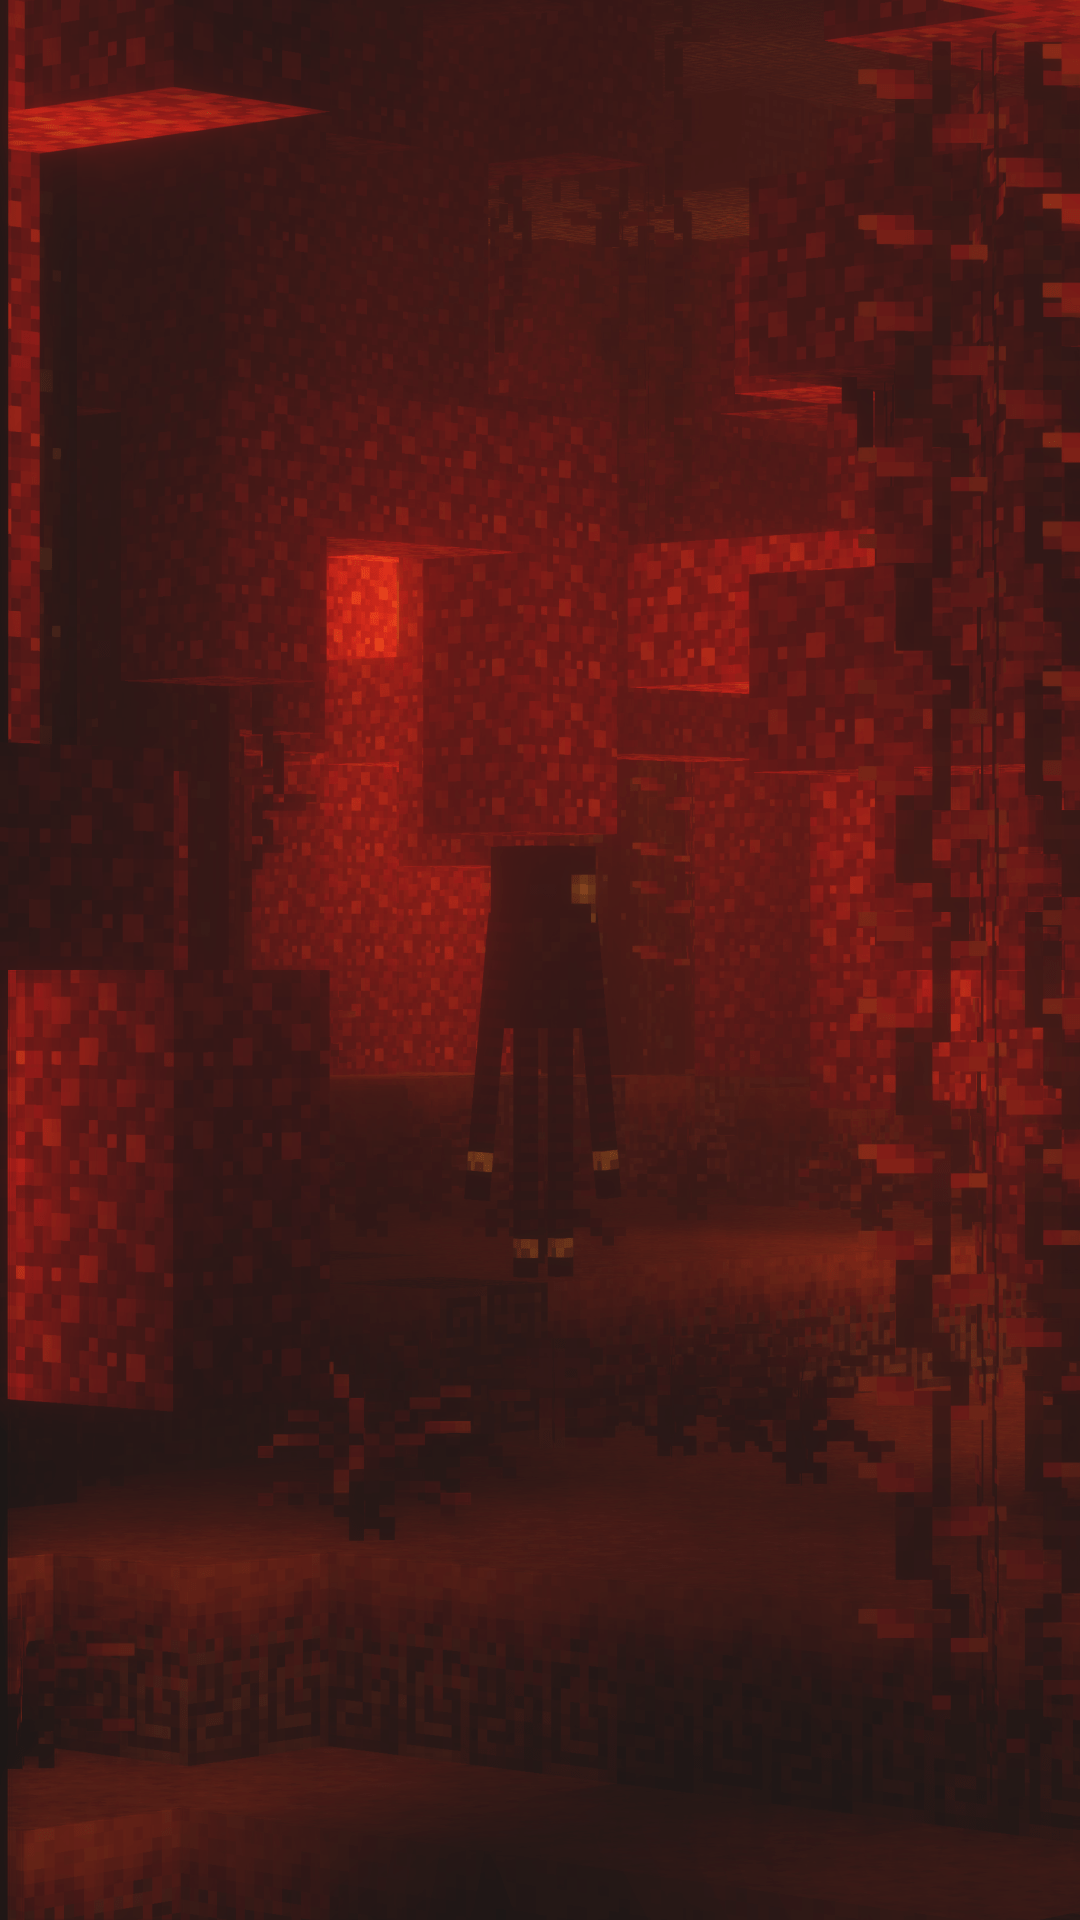 A red and black pixelated image of a man in a red room. - Crimson, Minecraft